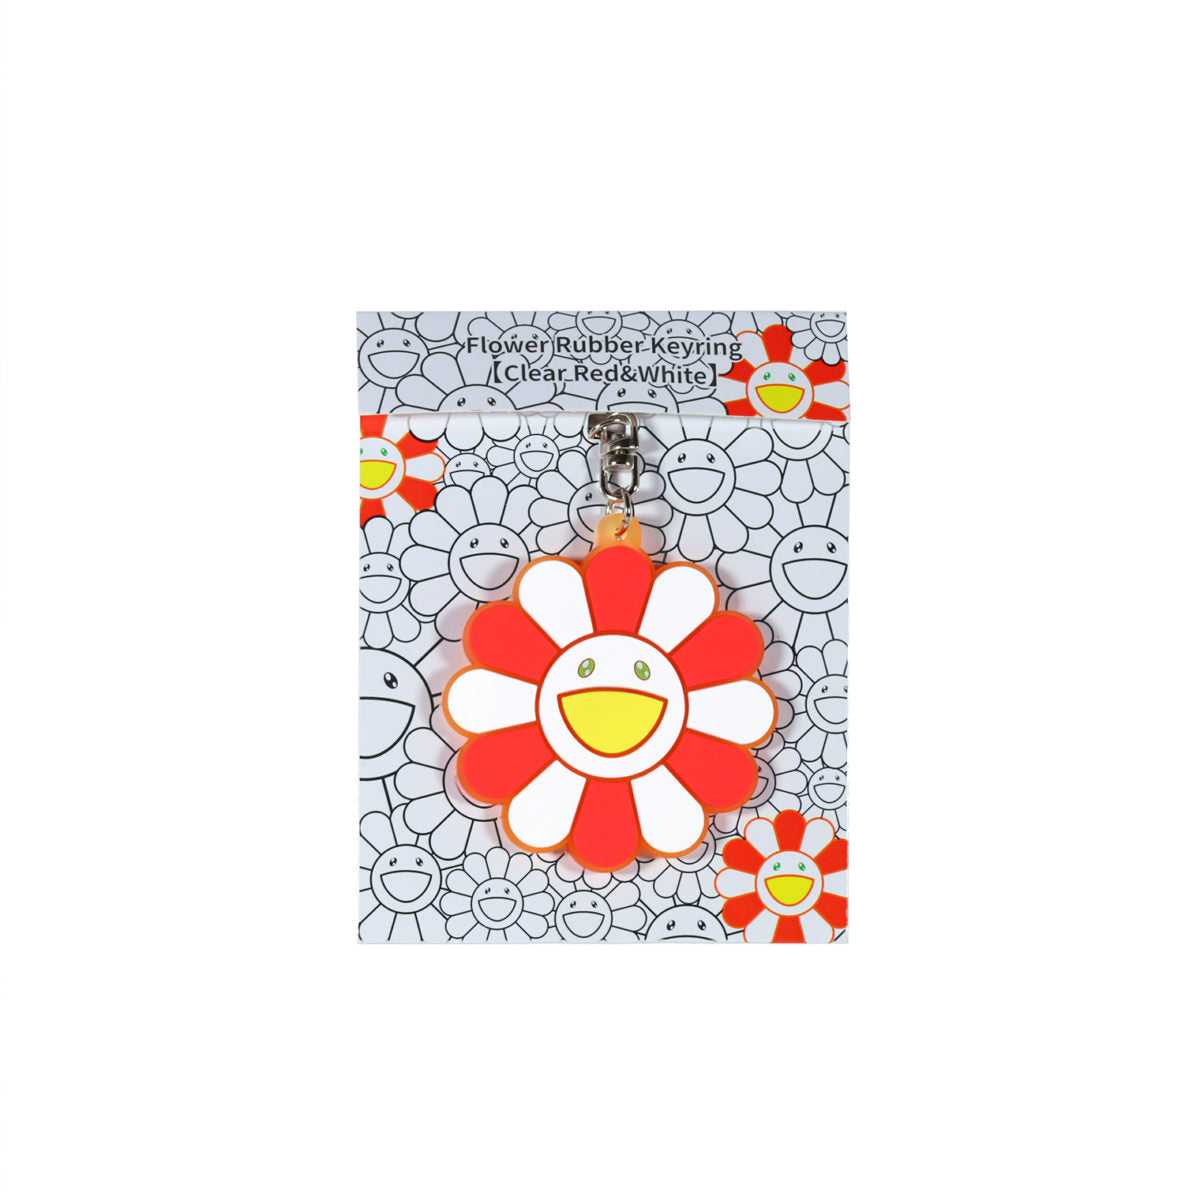 TAKASHI MURAKAMI - Flower Rubber Keyring (Clear Red and White)